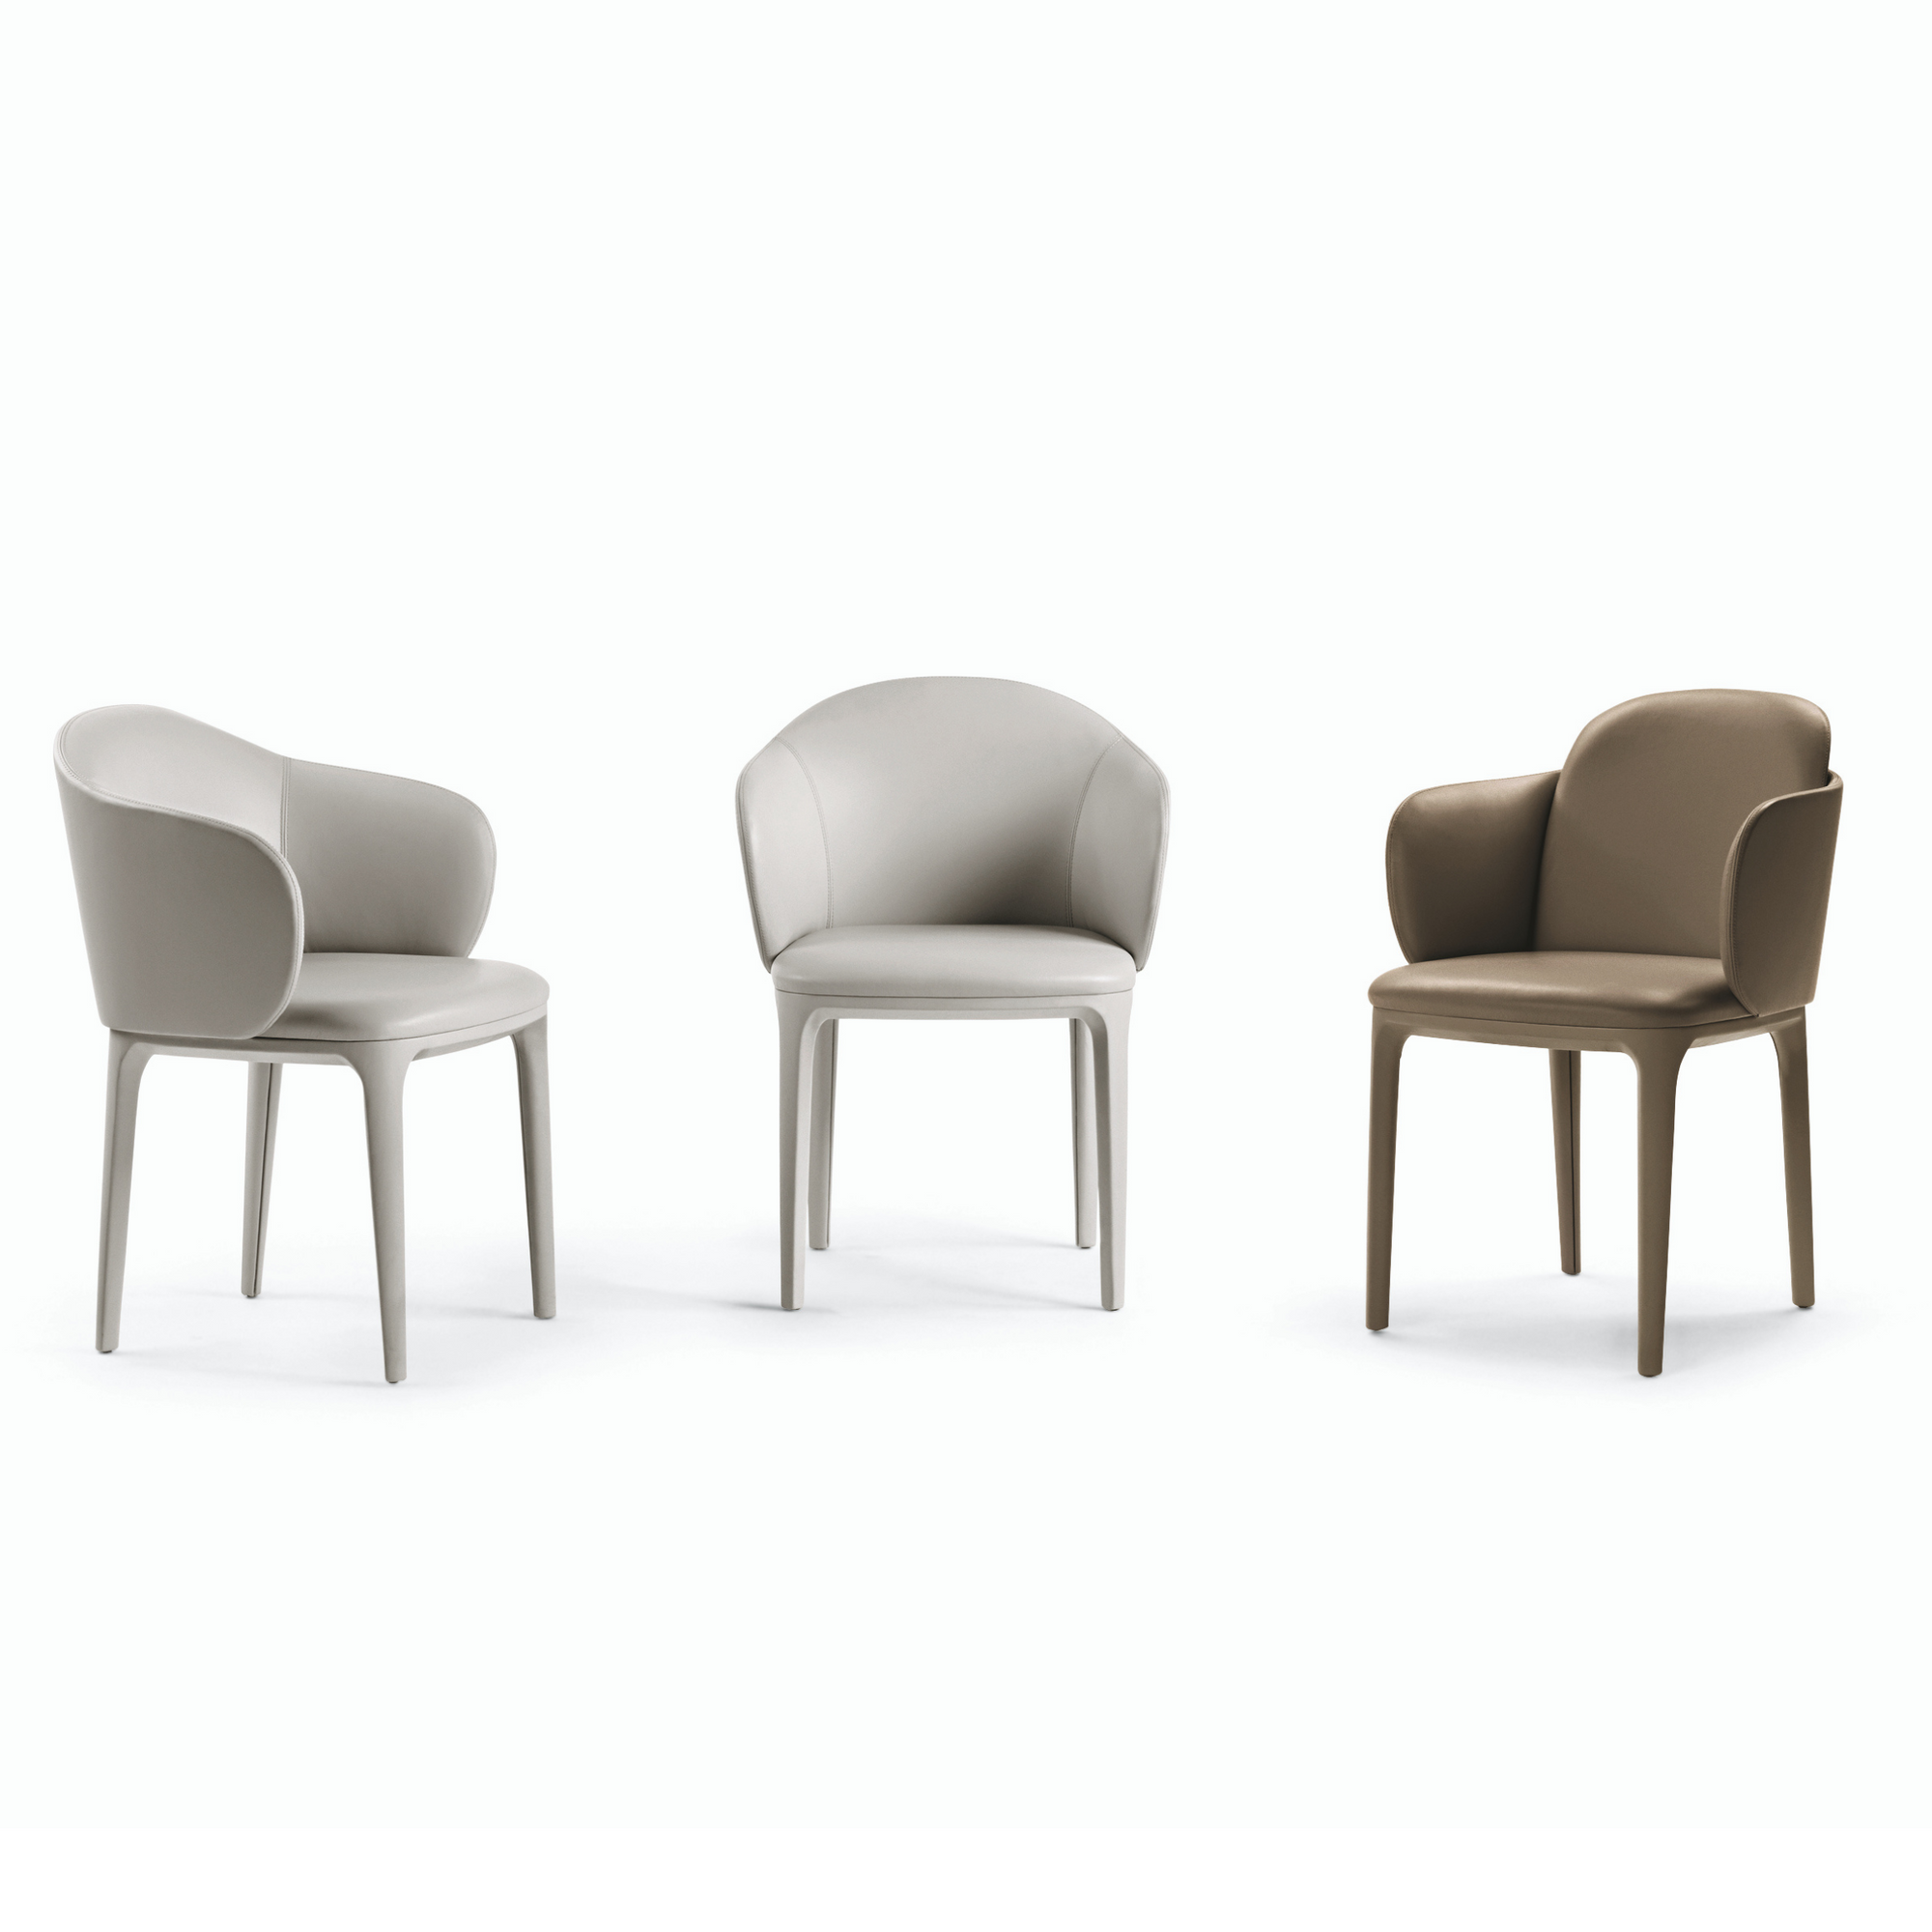 Manda Plus chair and armchair can be interpreted by their keywords: elegance and craftsmanship. It is a true piece of haute couture: the entire chair wooden structure is dressed in premium Italian leather Serena from Starset collection with its accurate sartorial confection.